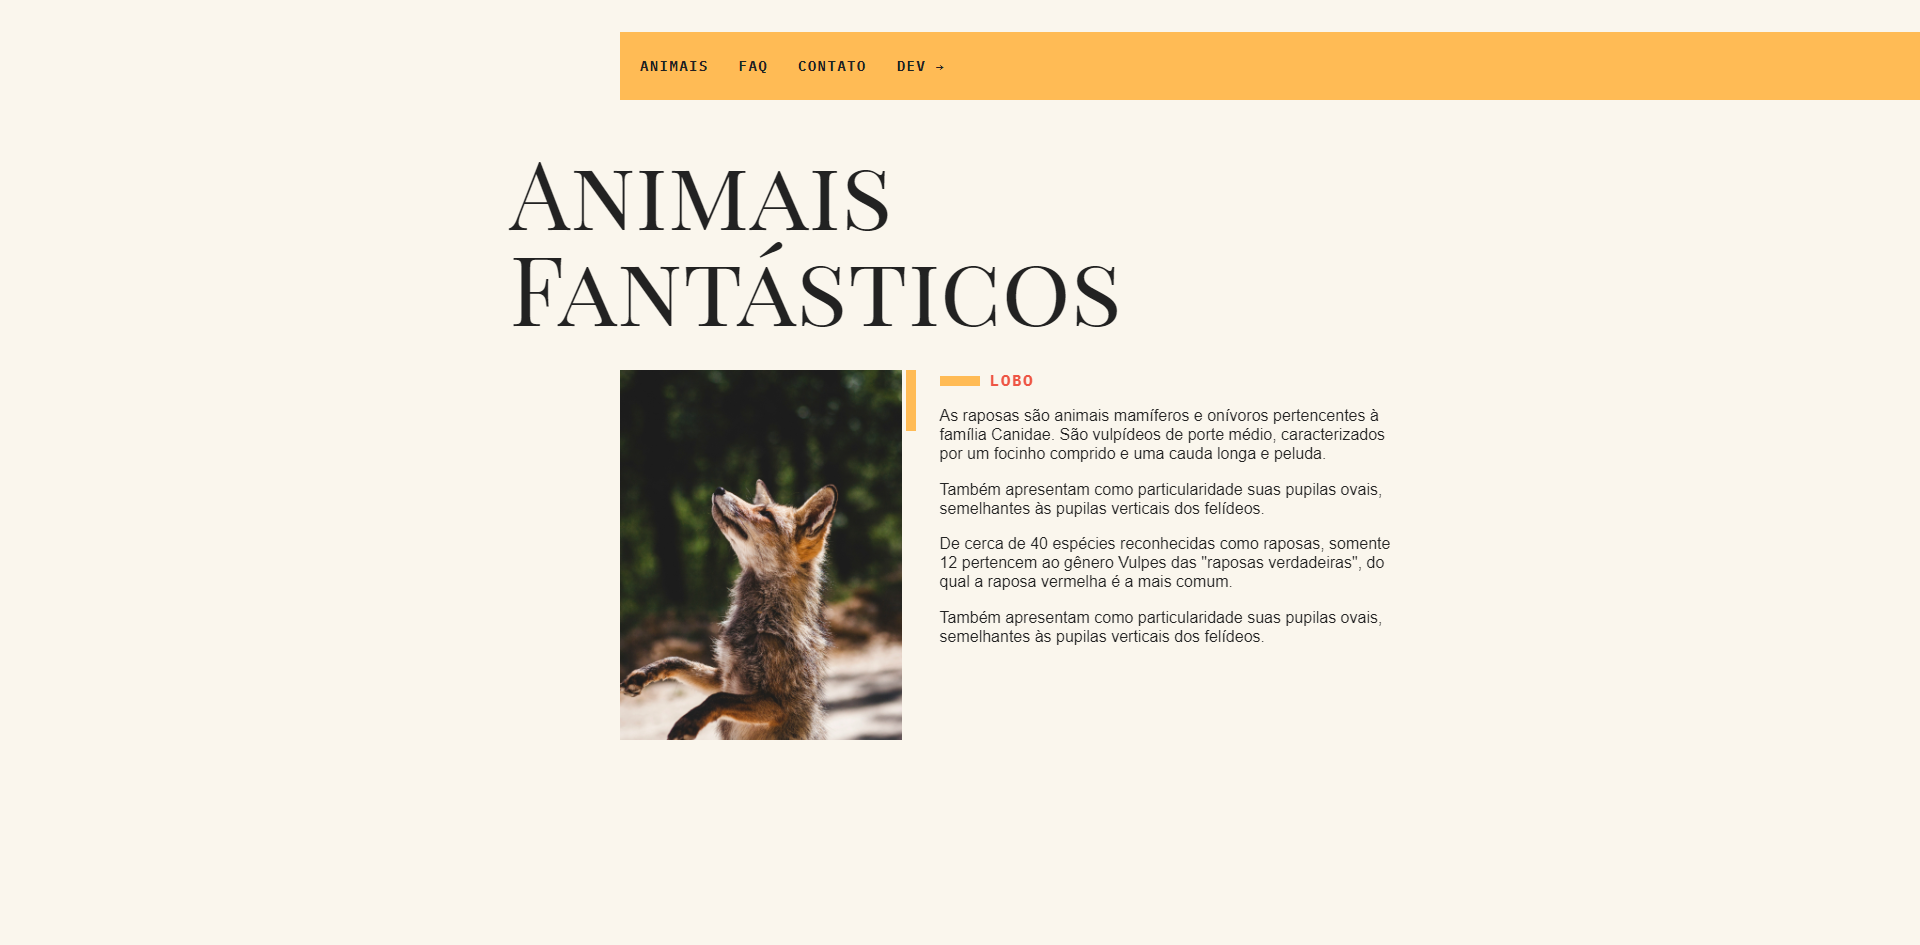 An image of the Animais Fantásticos project.